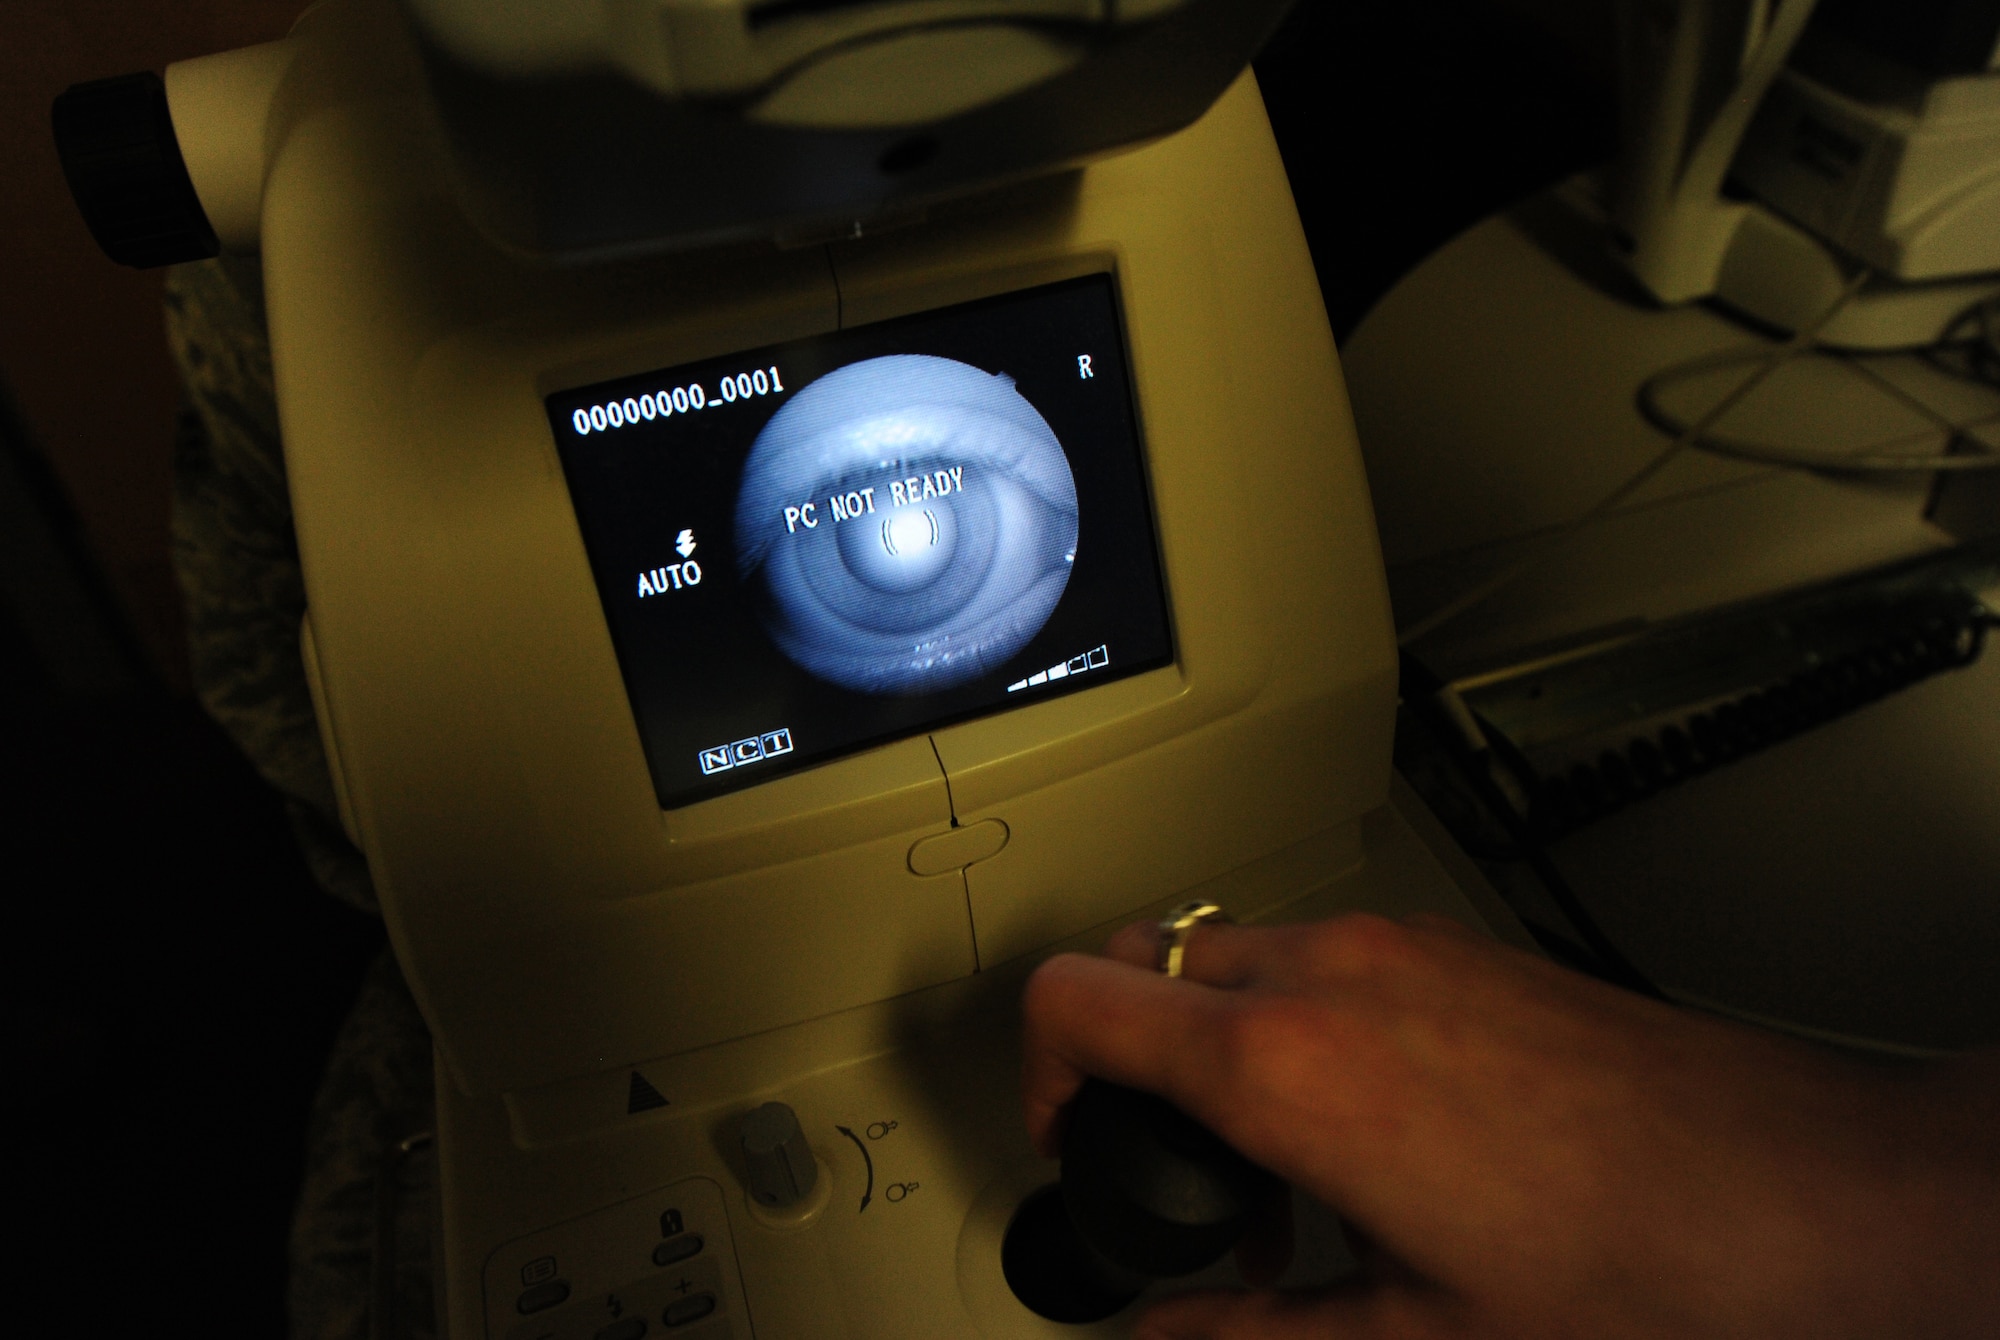 Alyssa White, 509th Medical Operations Squadron optometry technician, uses an orb scan to evaluate a patient’s eye in the optometry clinic at Whiteman Air Force Base, Mo., Sept. 4, 2013. The orb scan shows the curvature, structure, integrity and thickness of a patient’s cornea. (U.S. Air Force photo by Staff Sgt. Nick Wilson/Released)